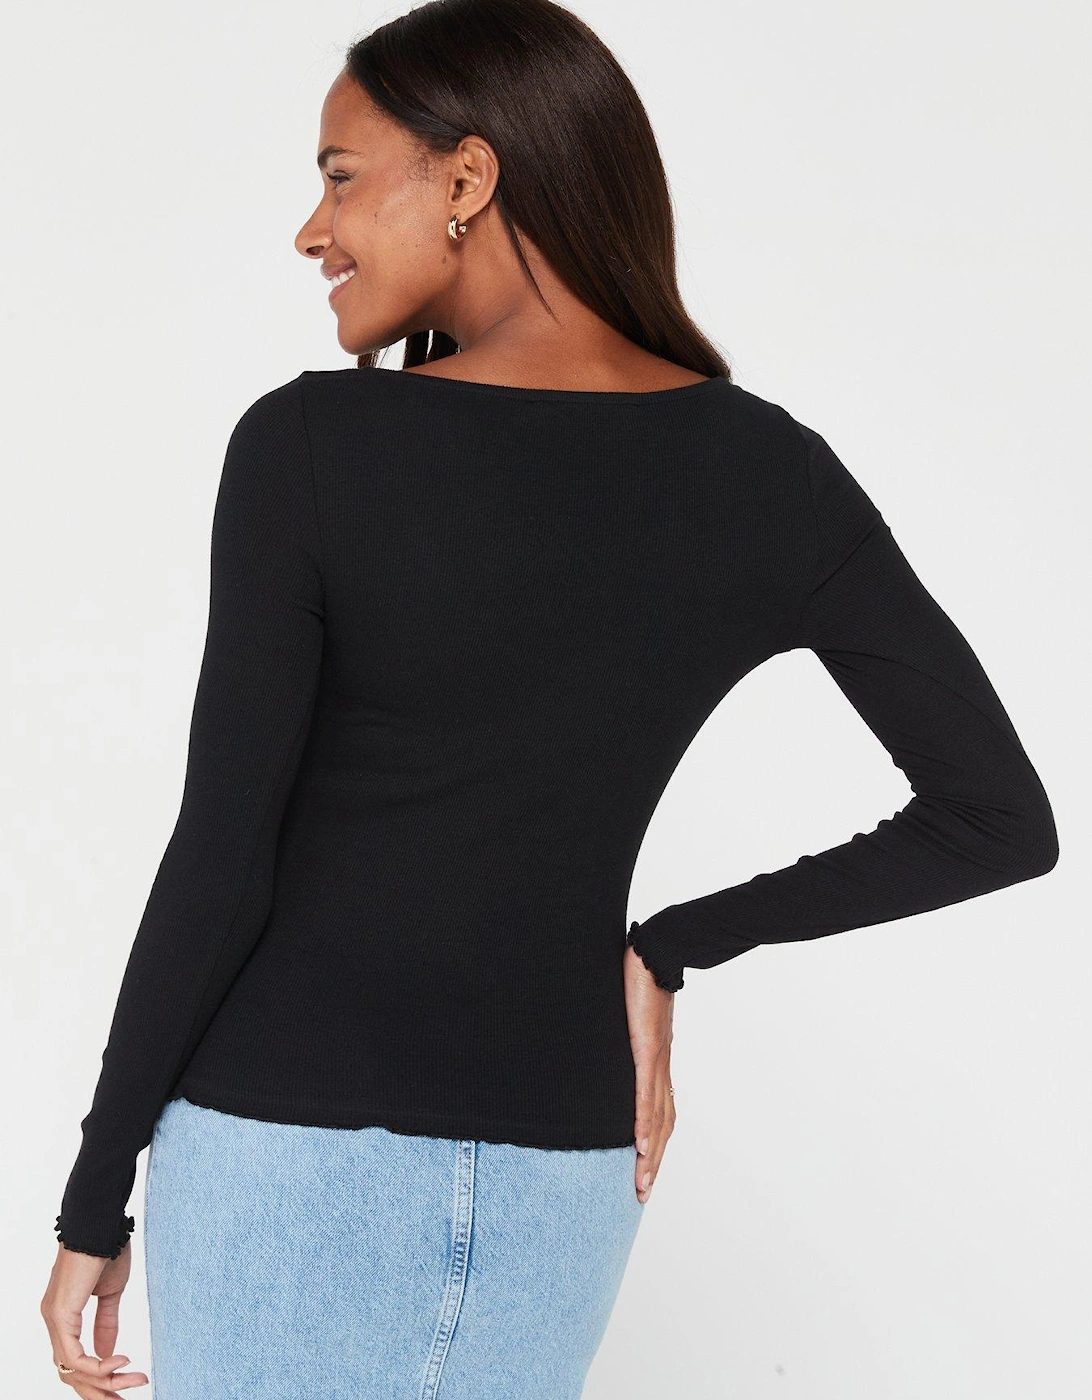 Ruched Front Long Sleeve Rib Top - Black